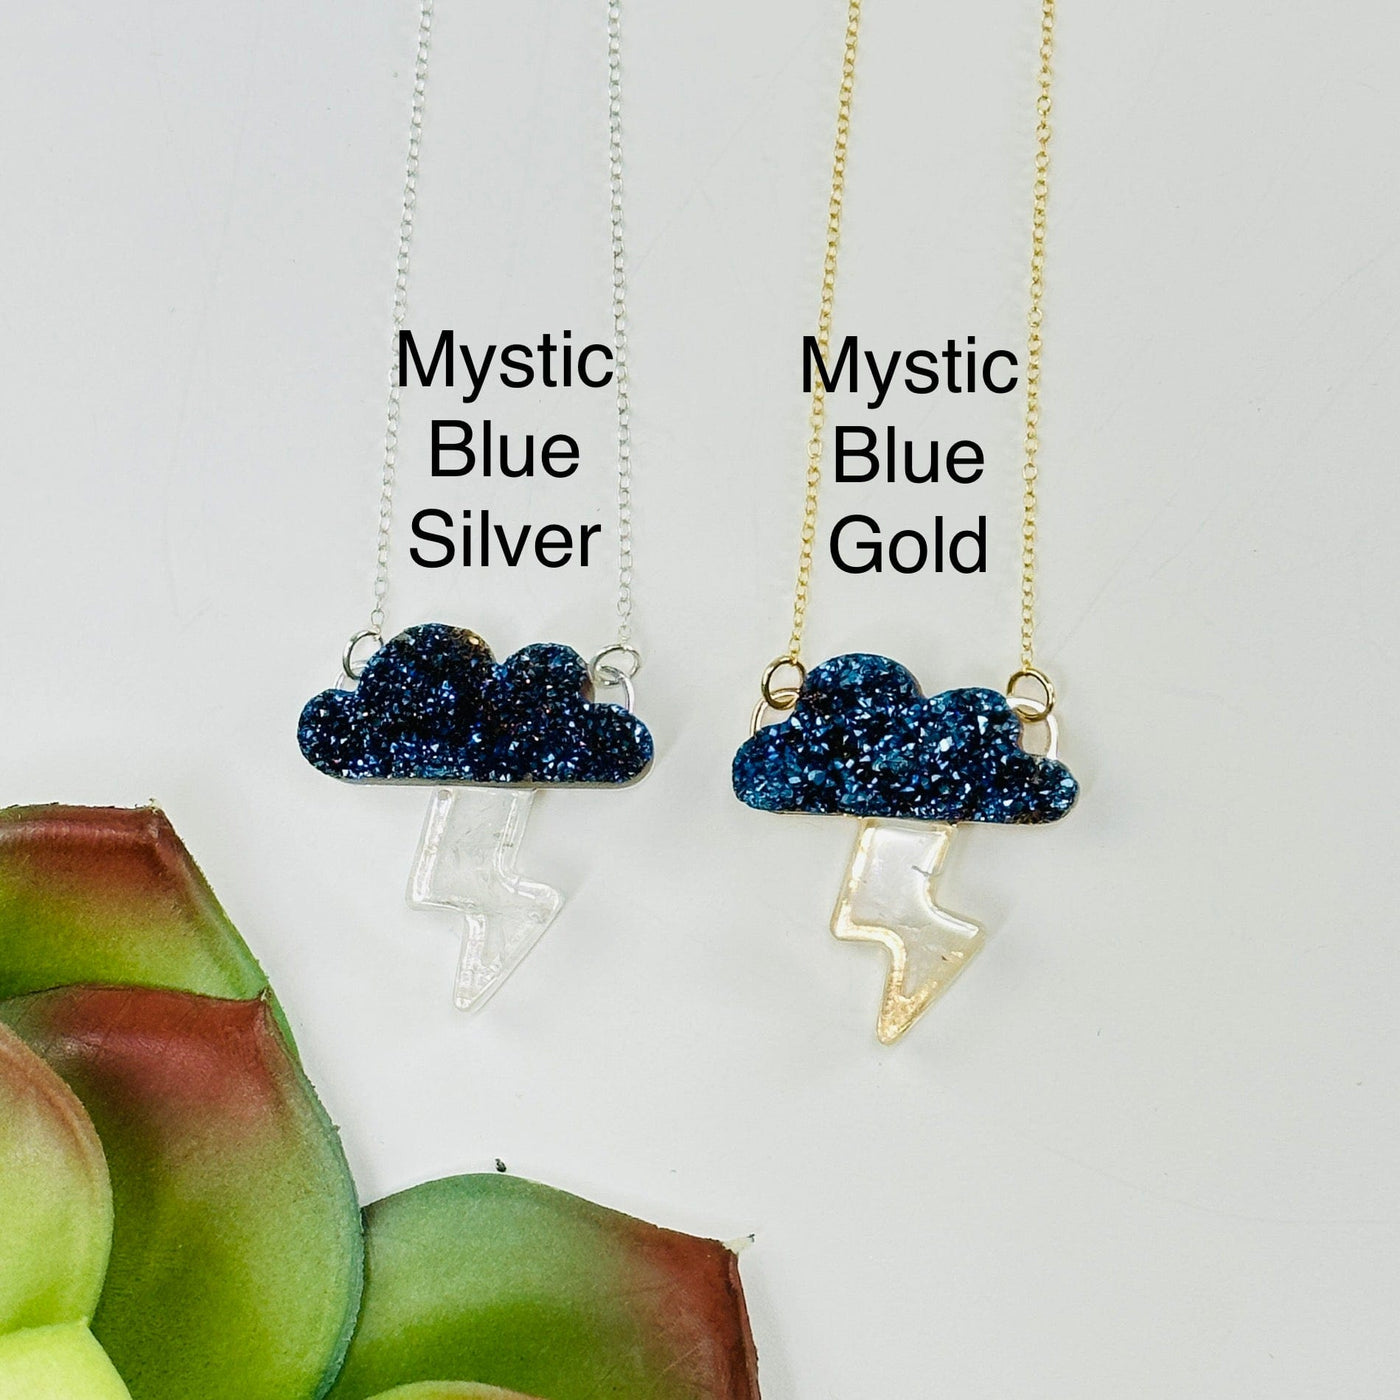 mystic blue variant in both gold and silver on white background